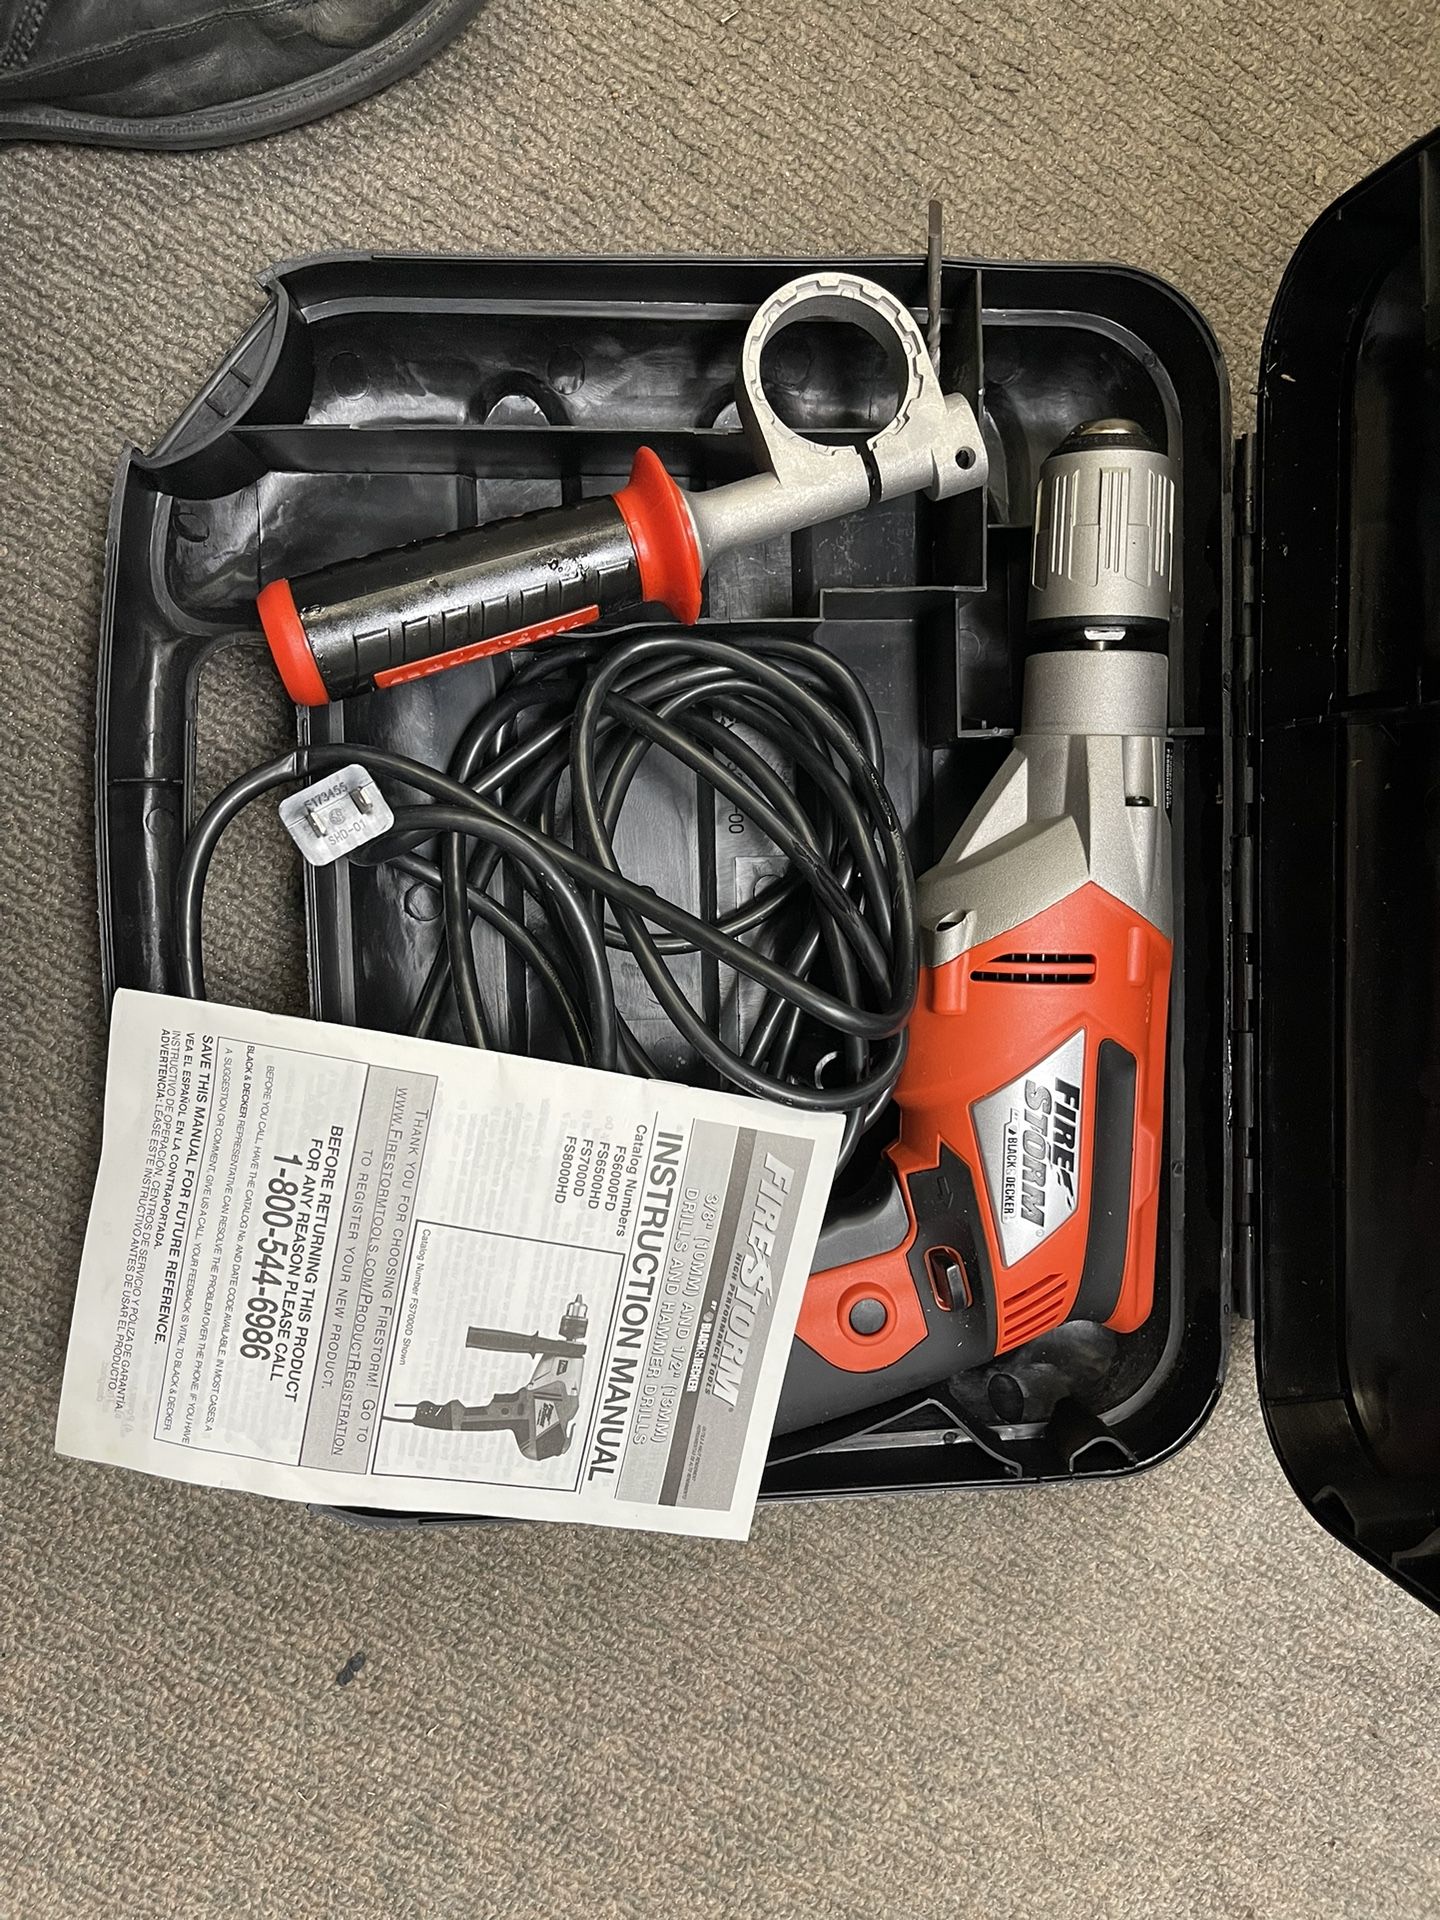 Black And Decker Firestorm Drill Barely Used 